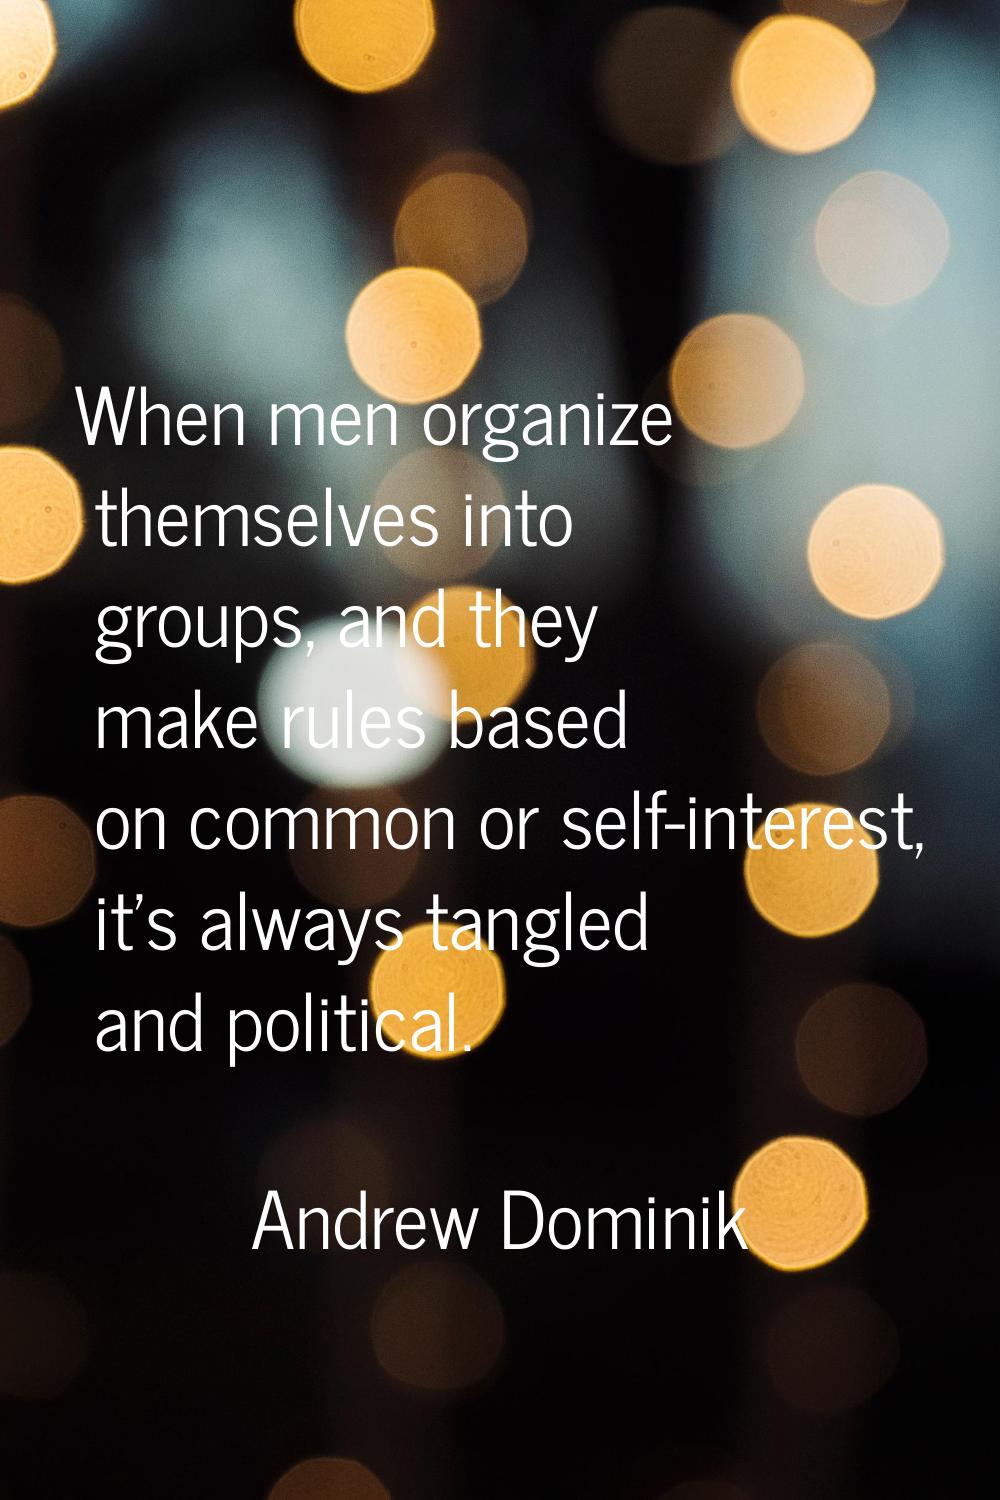 When men organize themselves into groups, and they make rules based on common or self-interest, it'